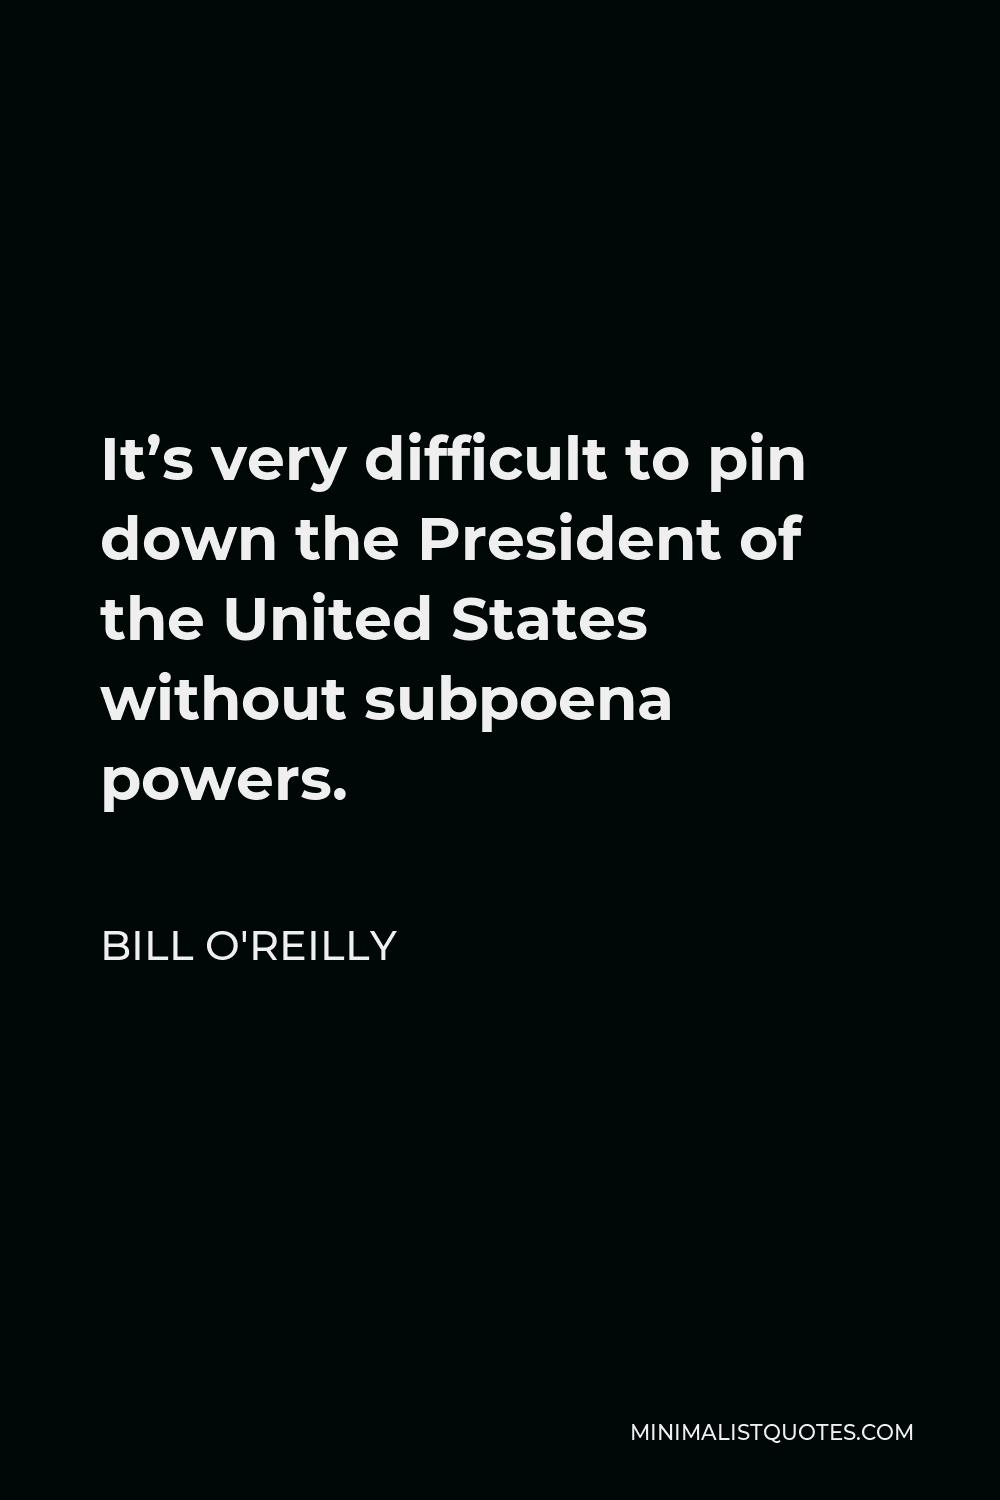 Bill O'Reilly Quote - It’s very difficult to pin down the President of the United States without subpoena powers.